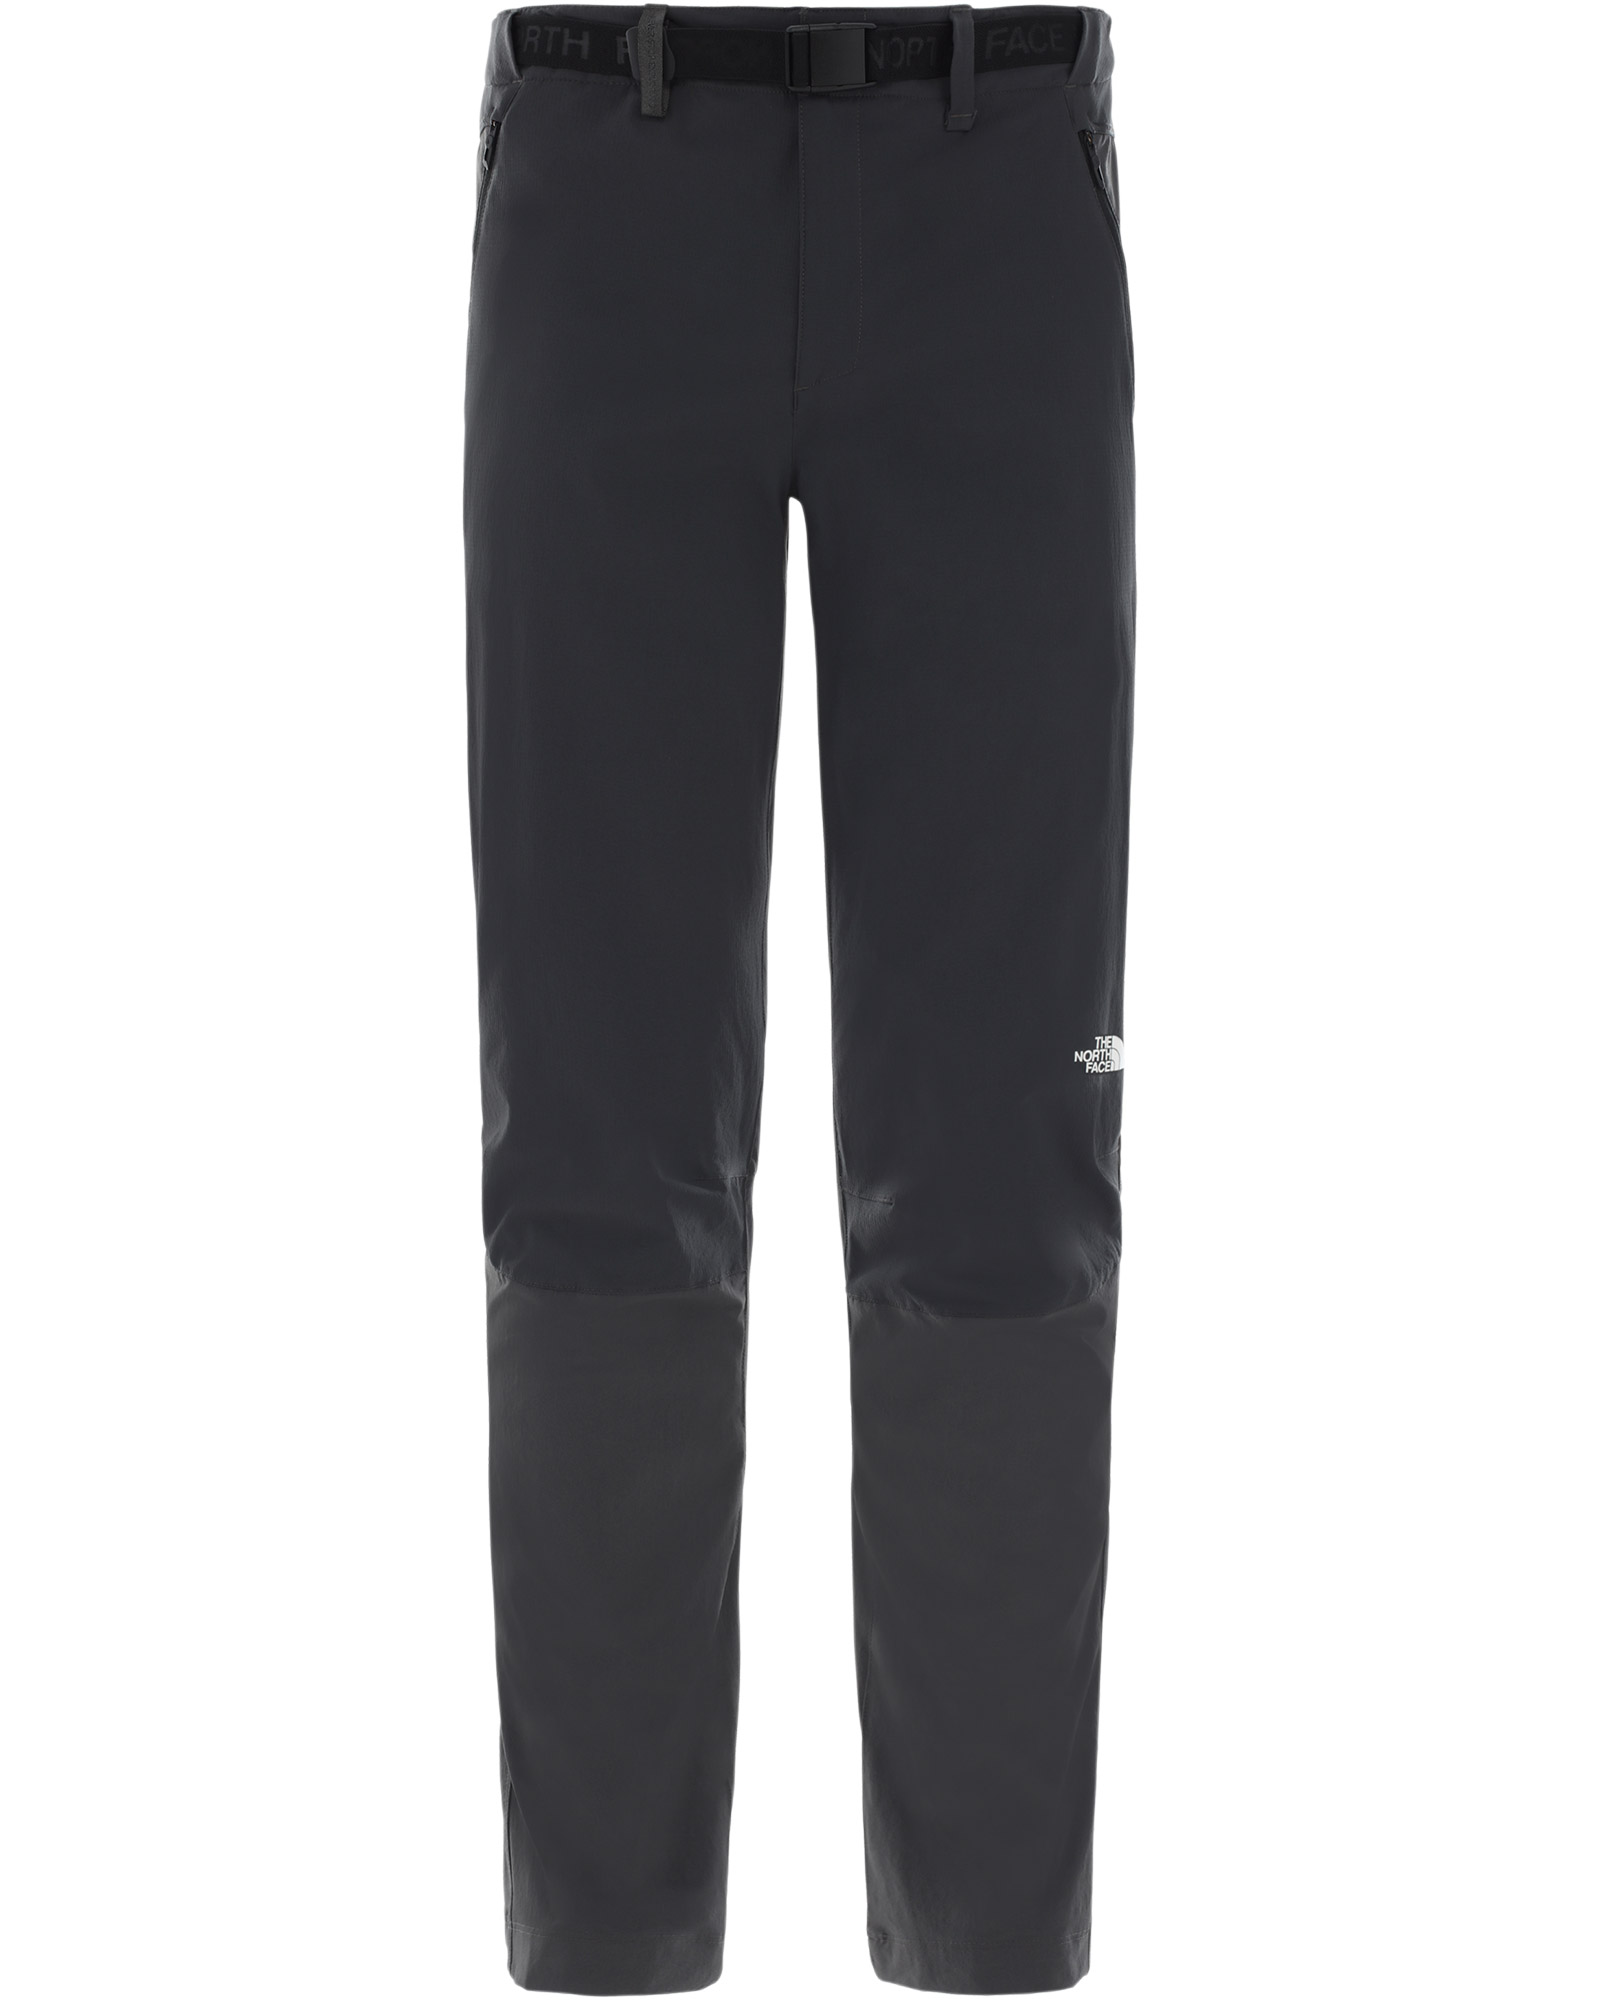 The North Face Speedlight 2 Mens Pants